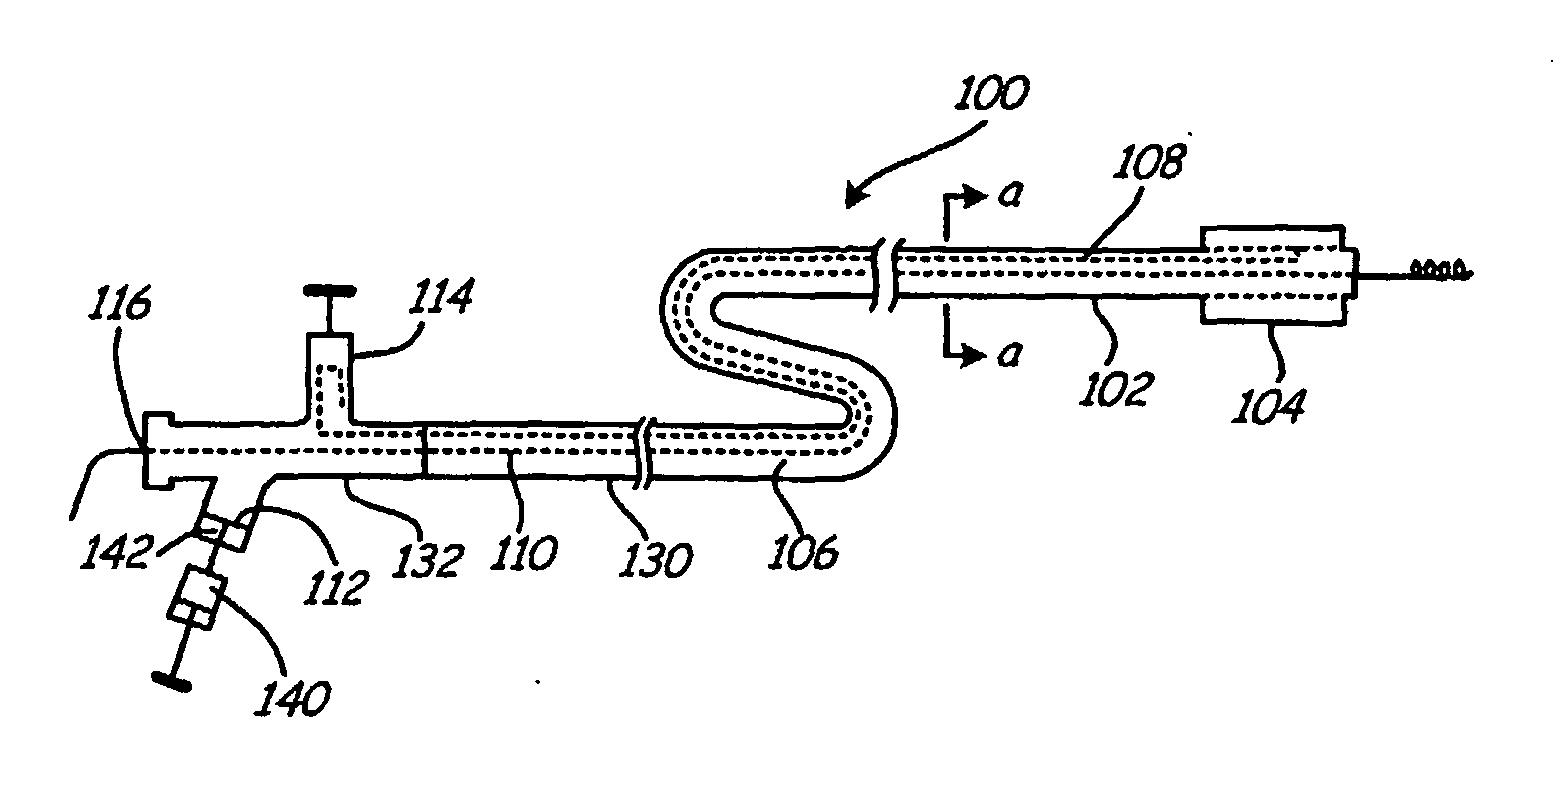 Extendable Device On An Aspiration Catheter